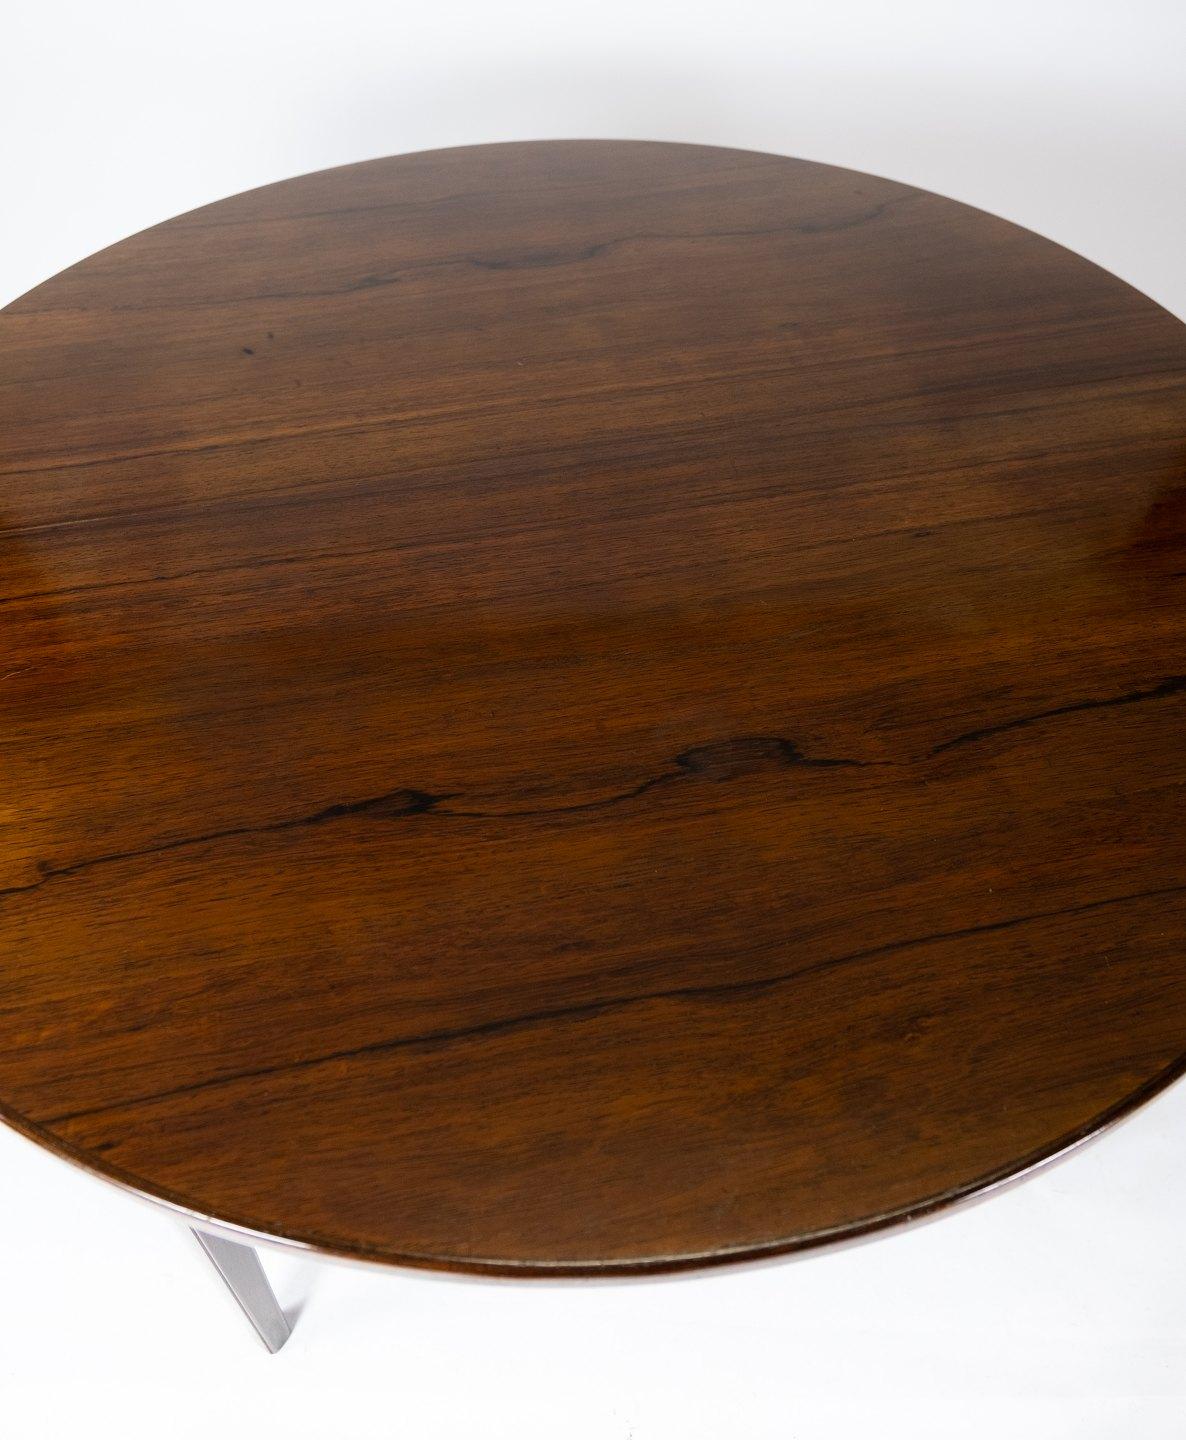 Scandinavian Modern Dining Table in Rosewood Designed by Omann Junior from the 1960s For Sale